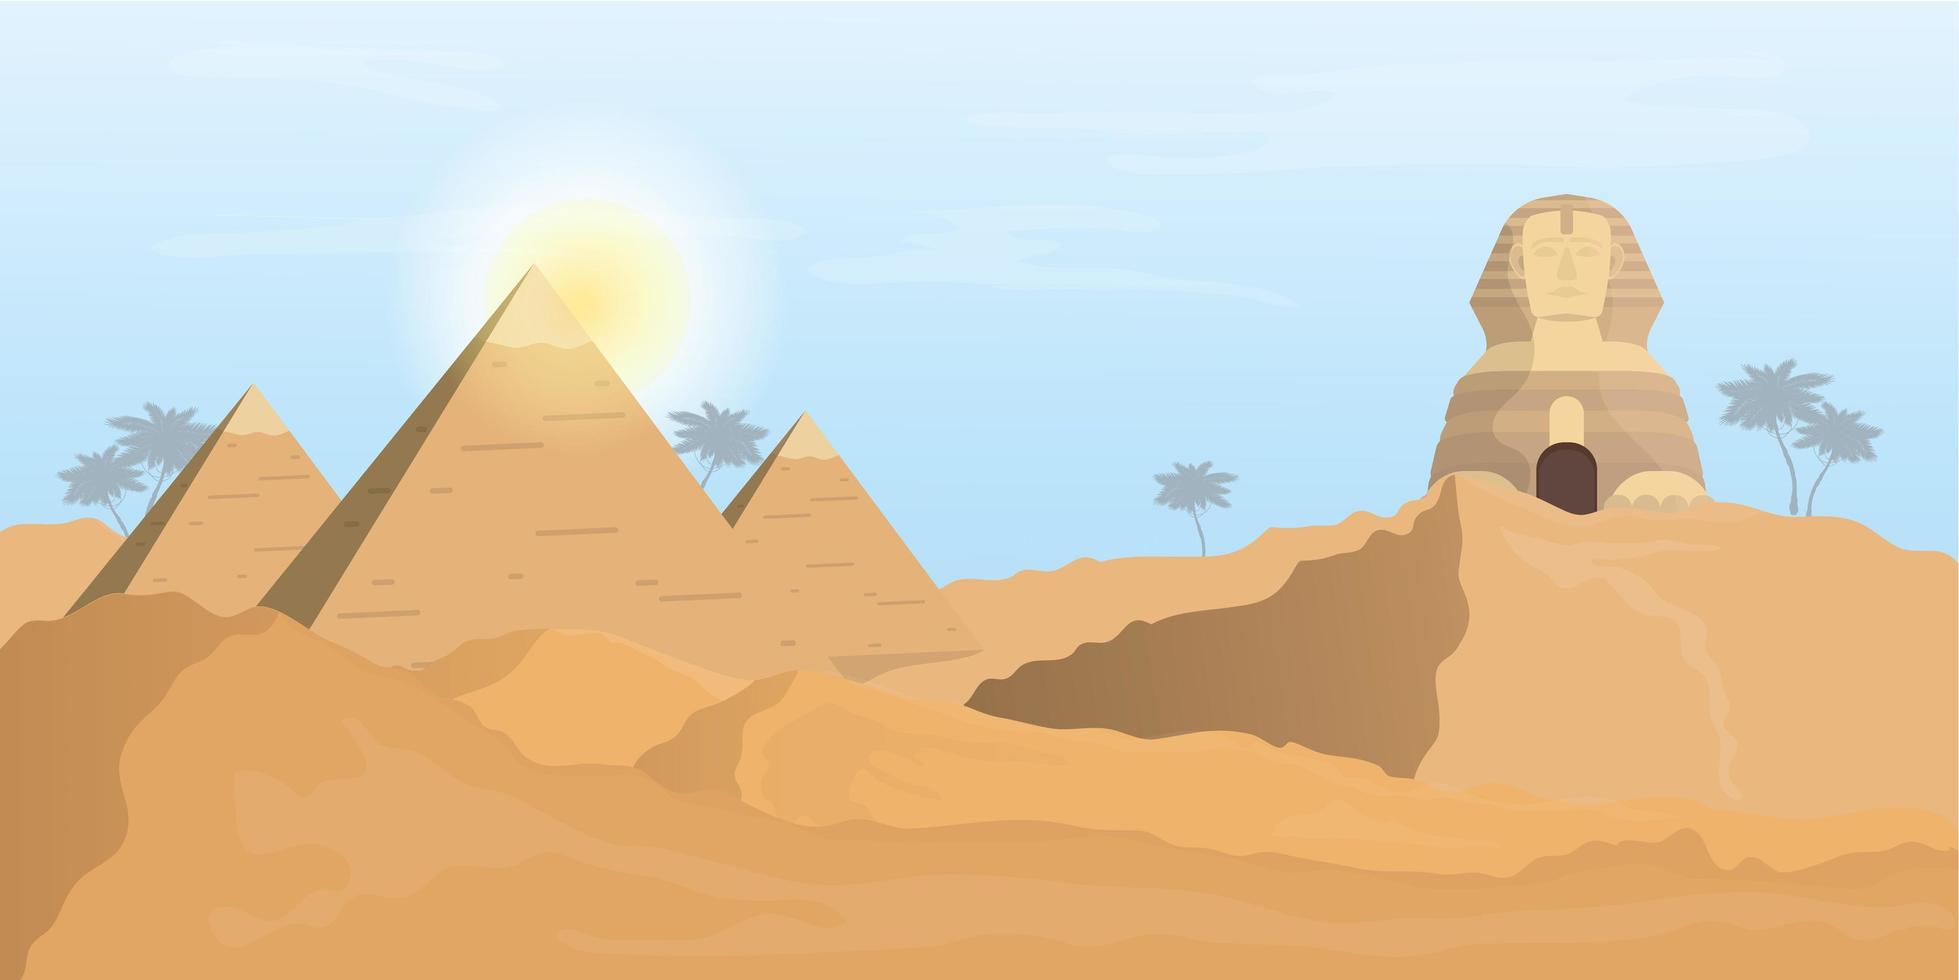 Egyptian Sphinx and Pyramids. Desert. A man leads camels through the desert. vector